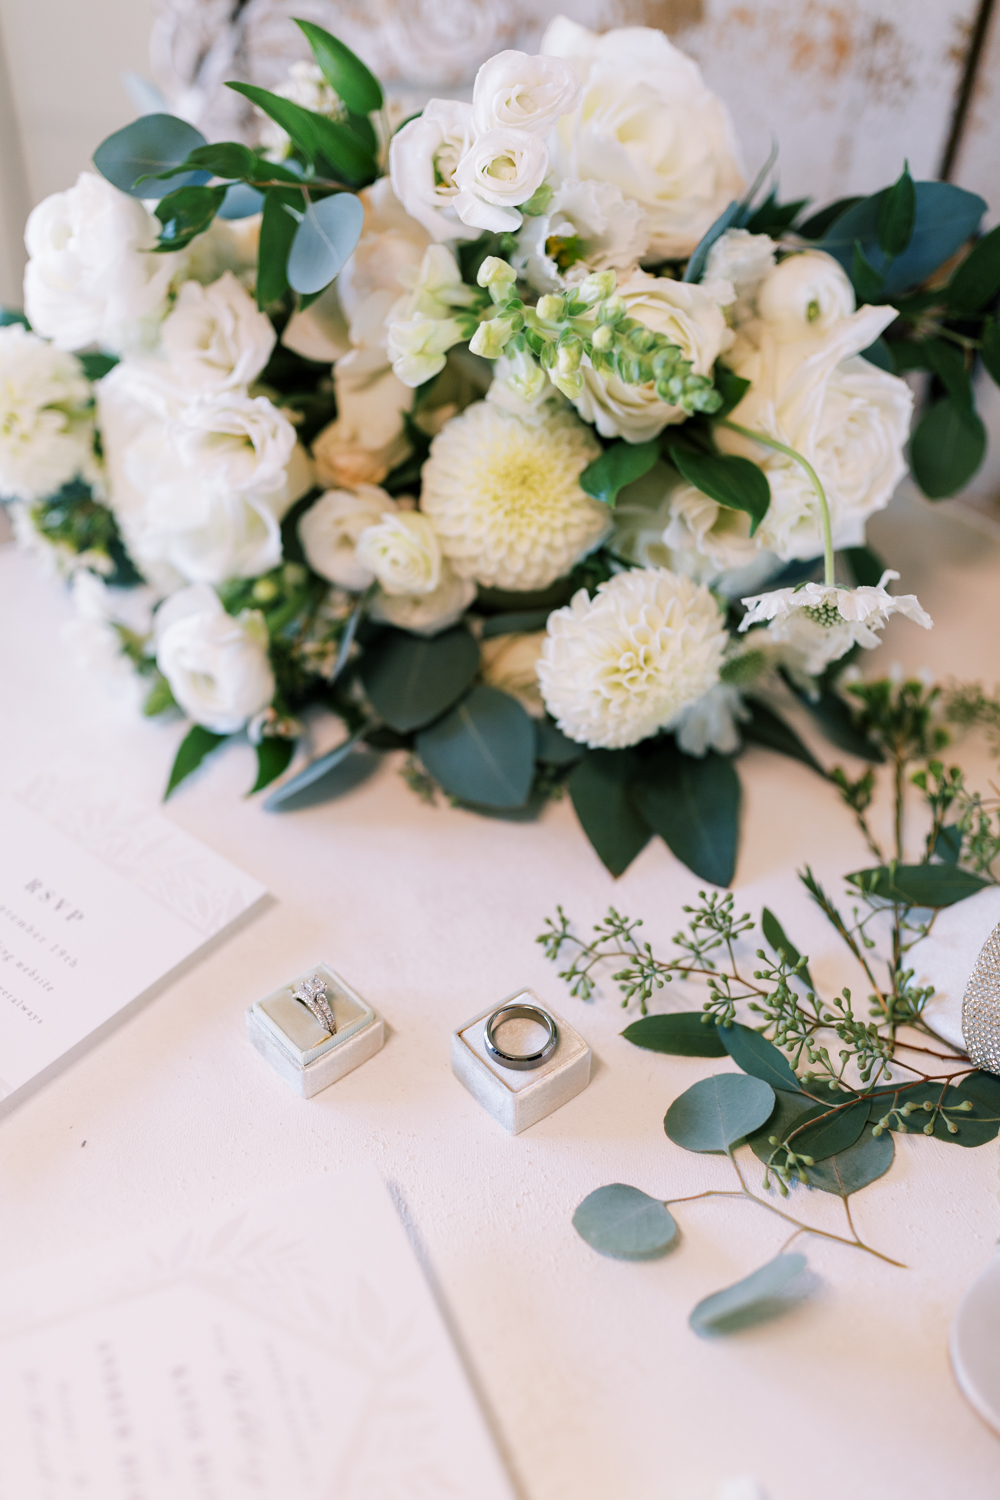 white and green wedding floral arrangement with classic wedding rings